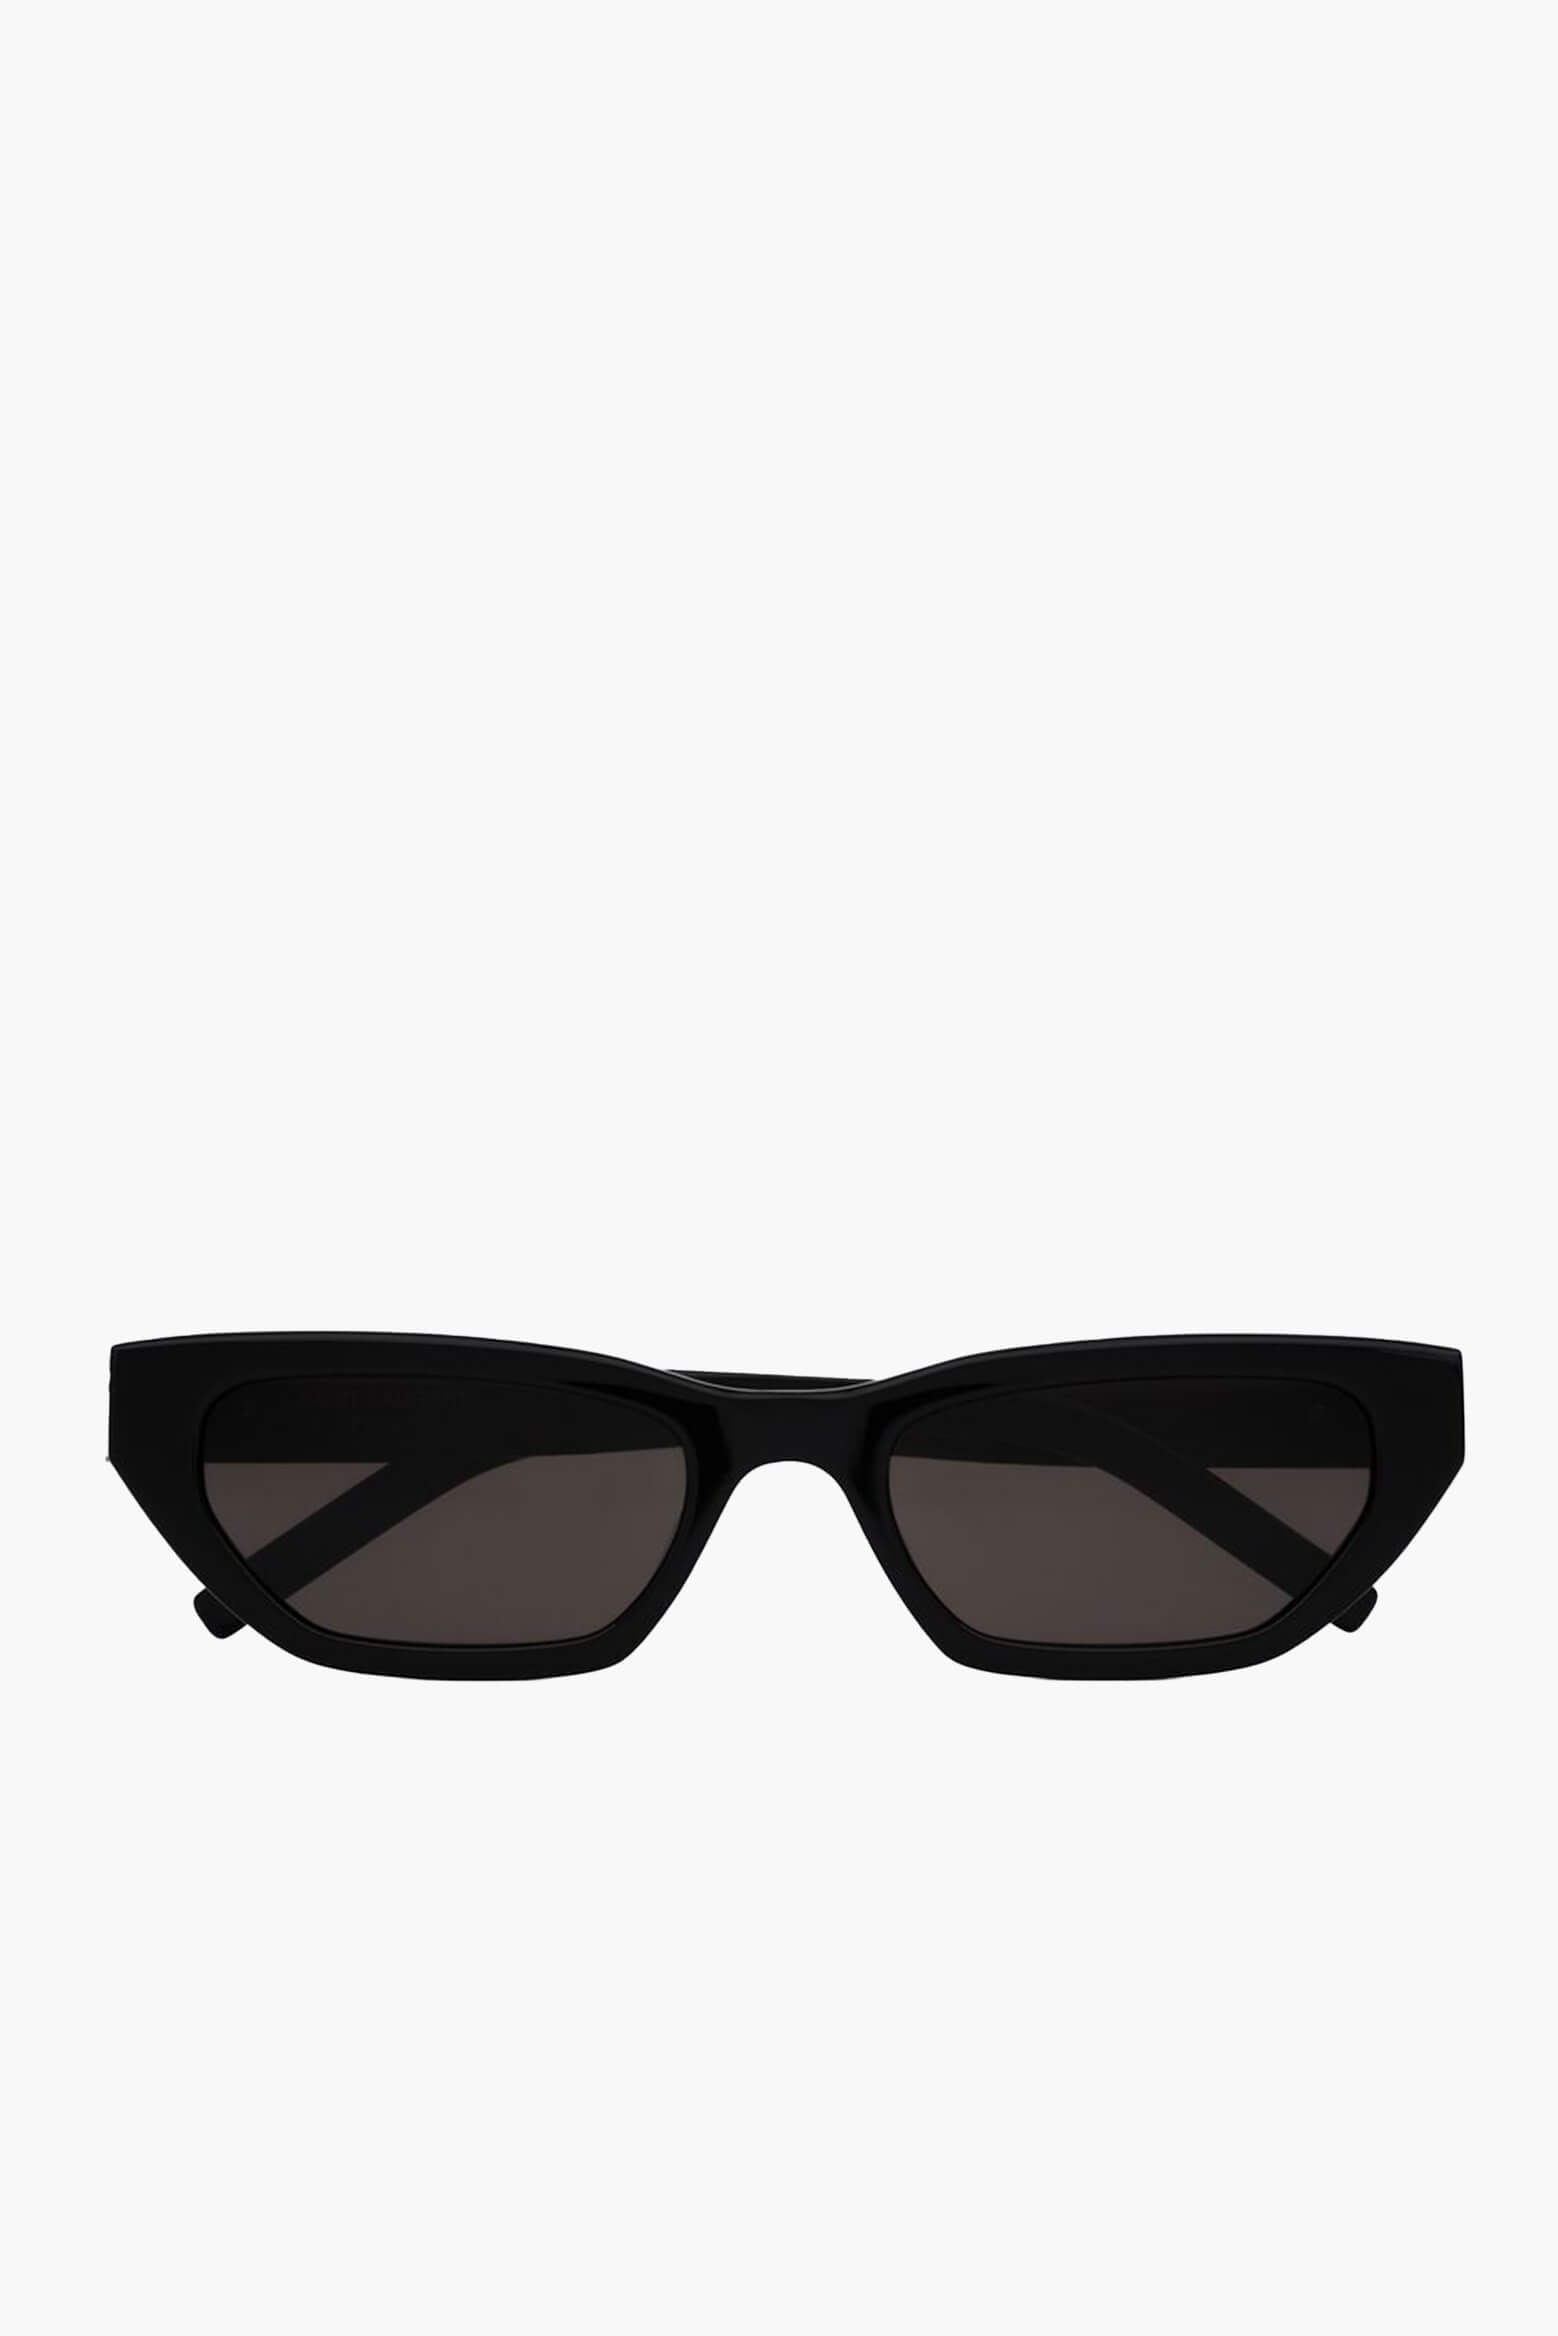 Saint Laurent Narrow Cat Eye Sunglasses in Black available at The New Trend Australia.